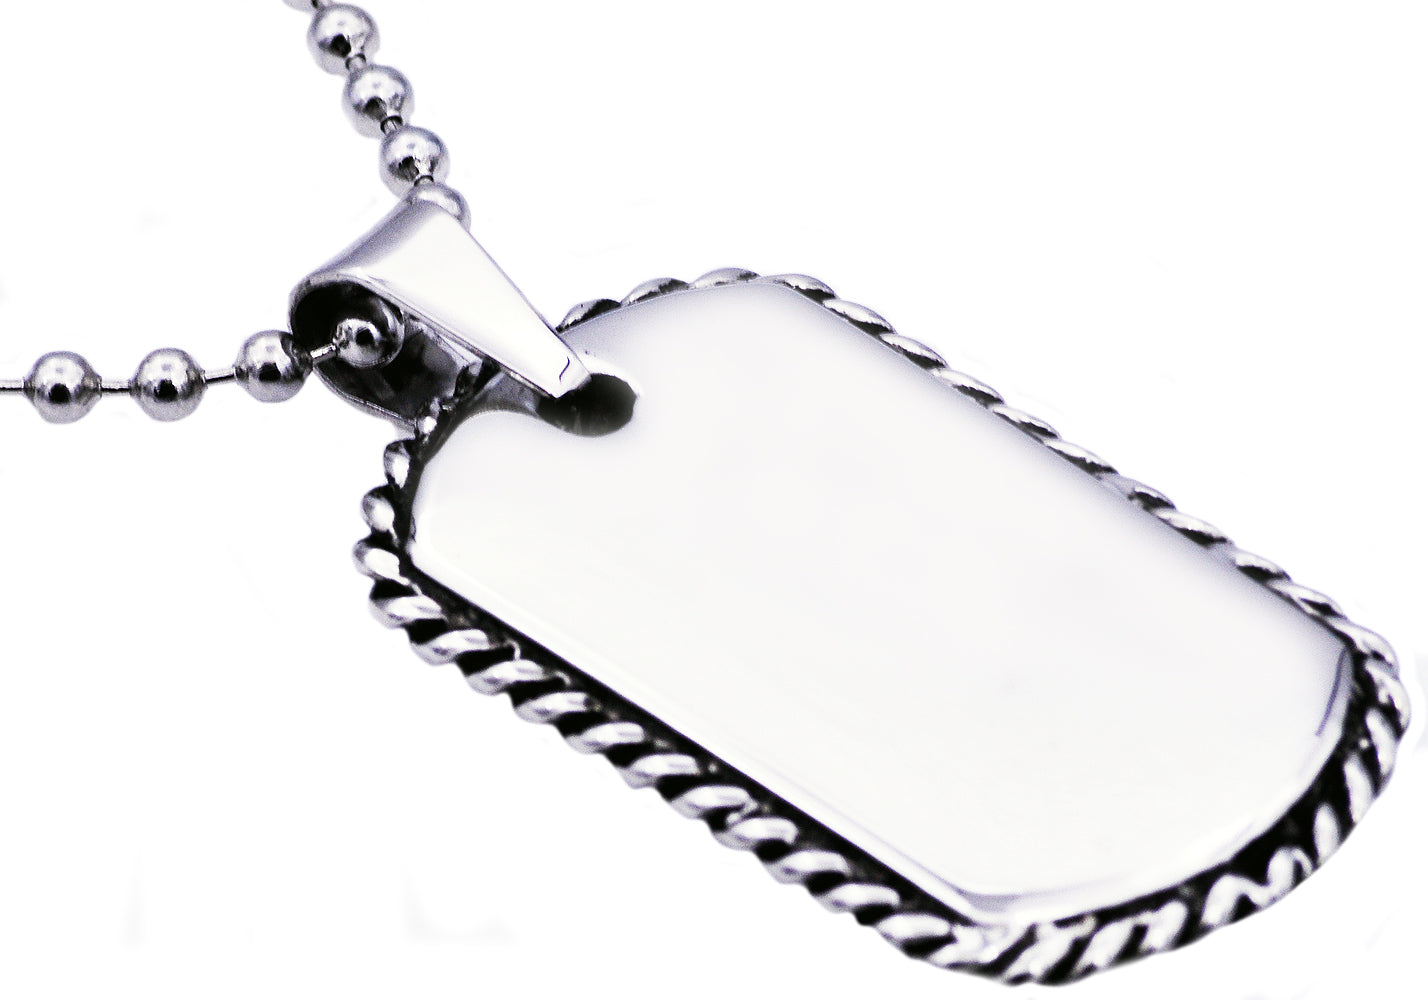 Silver Dog Tag Pendant Necklace